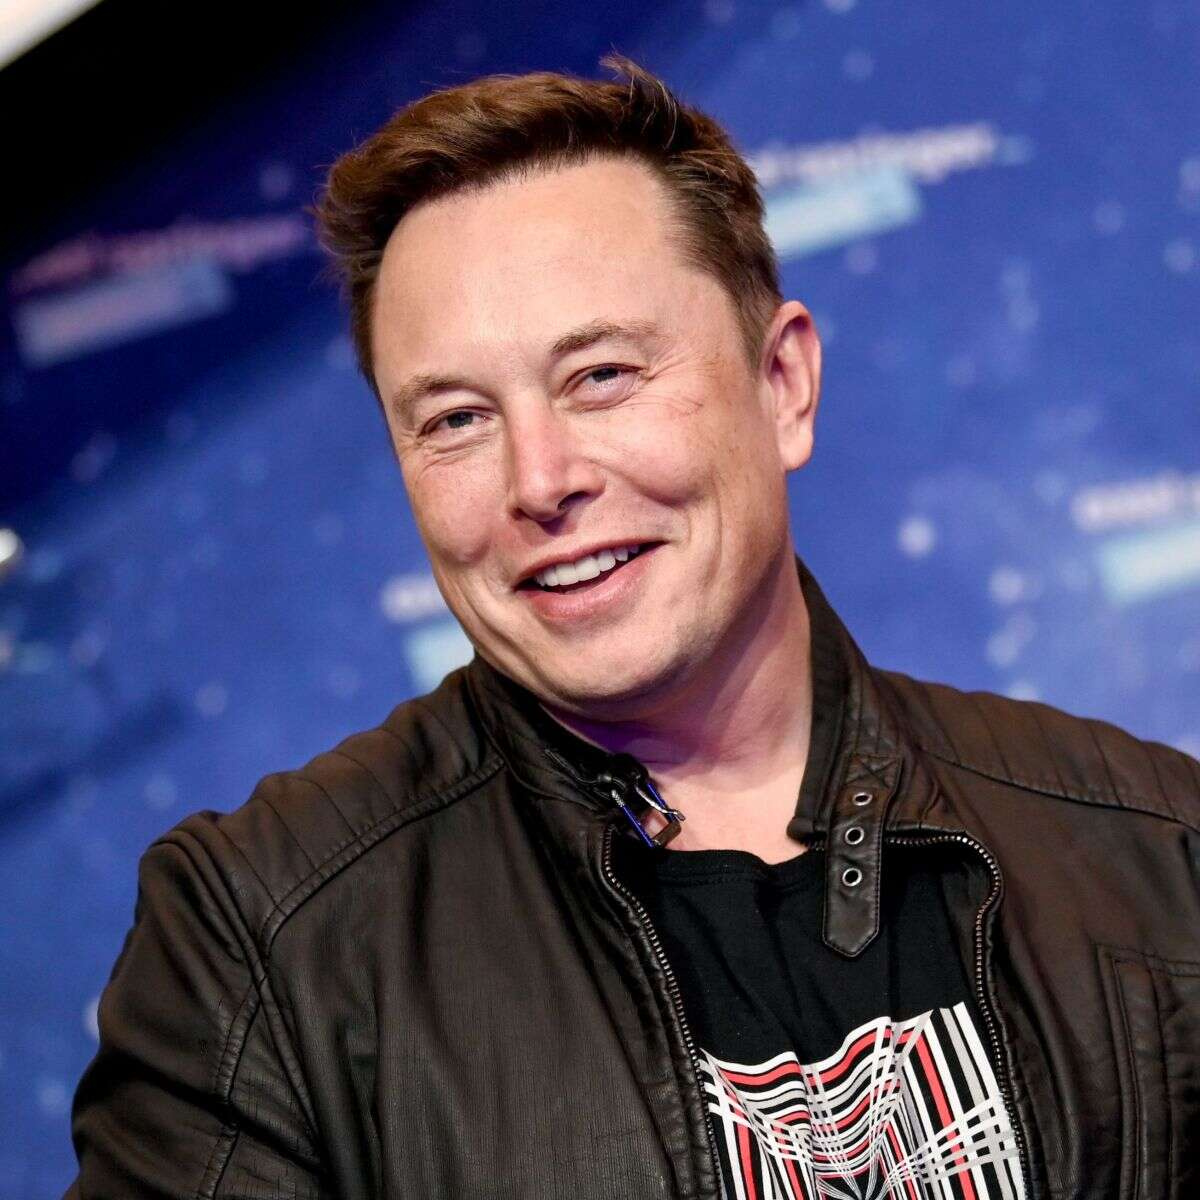 Elon Musk, the CEO of Tesla and Space X